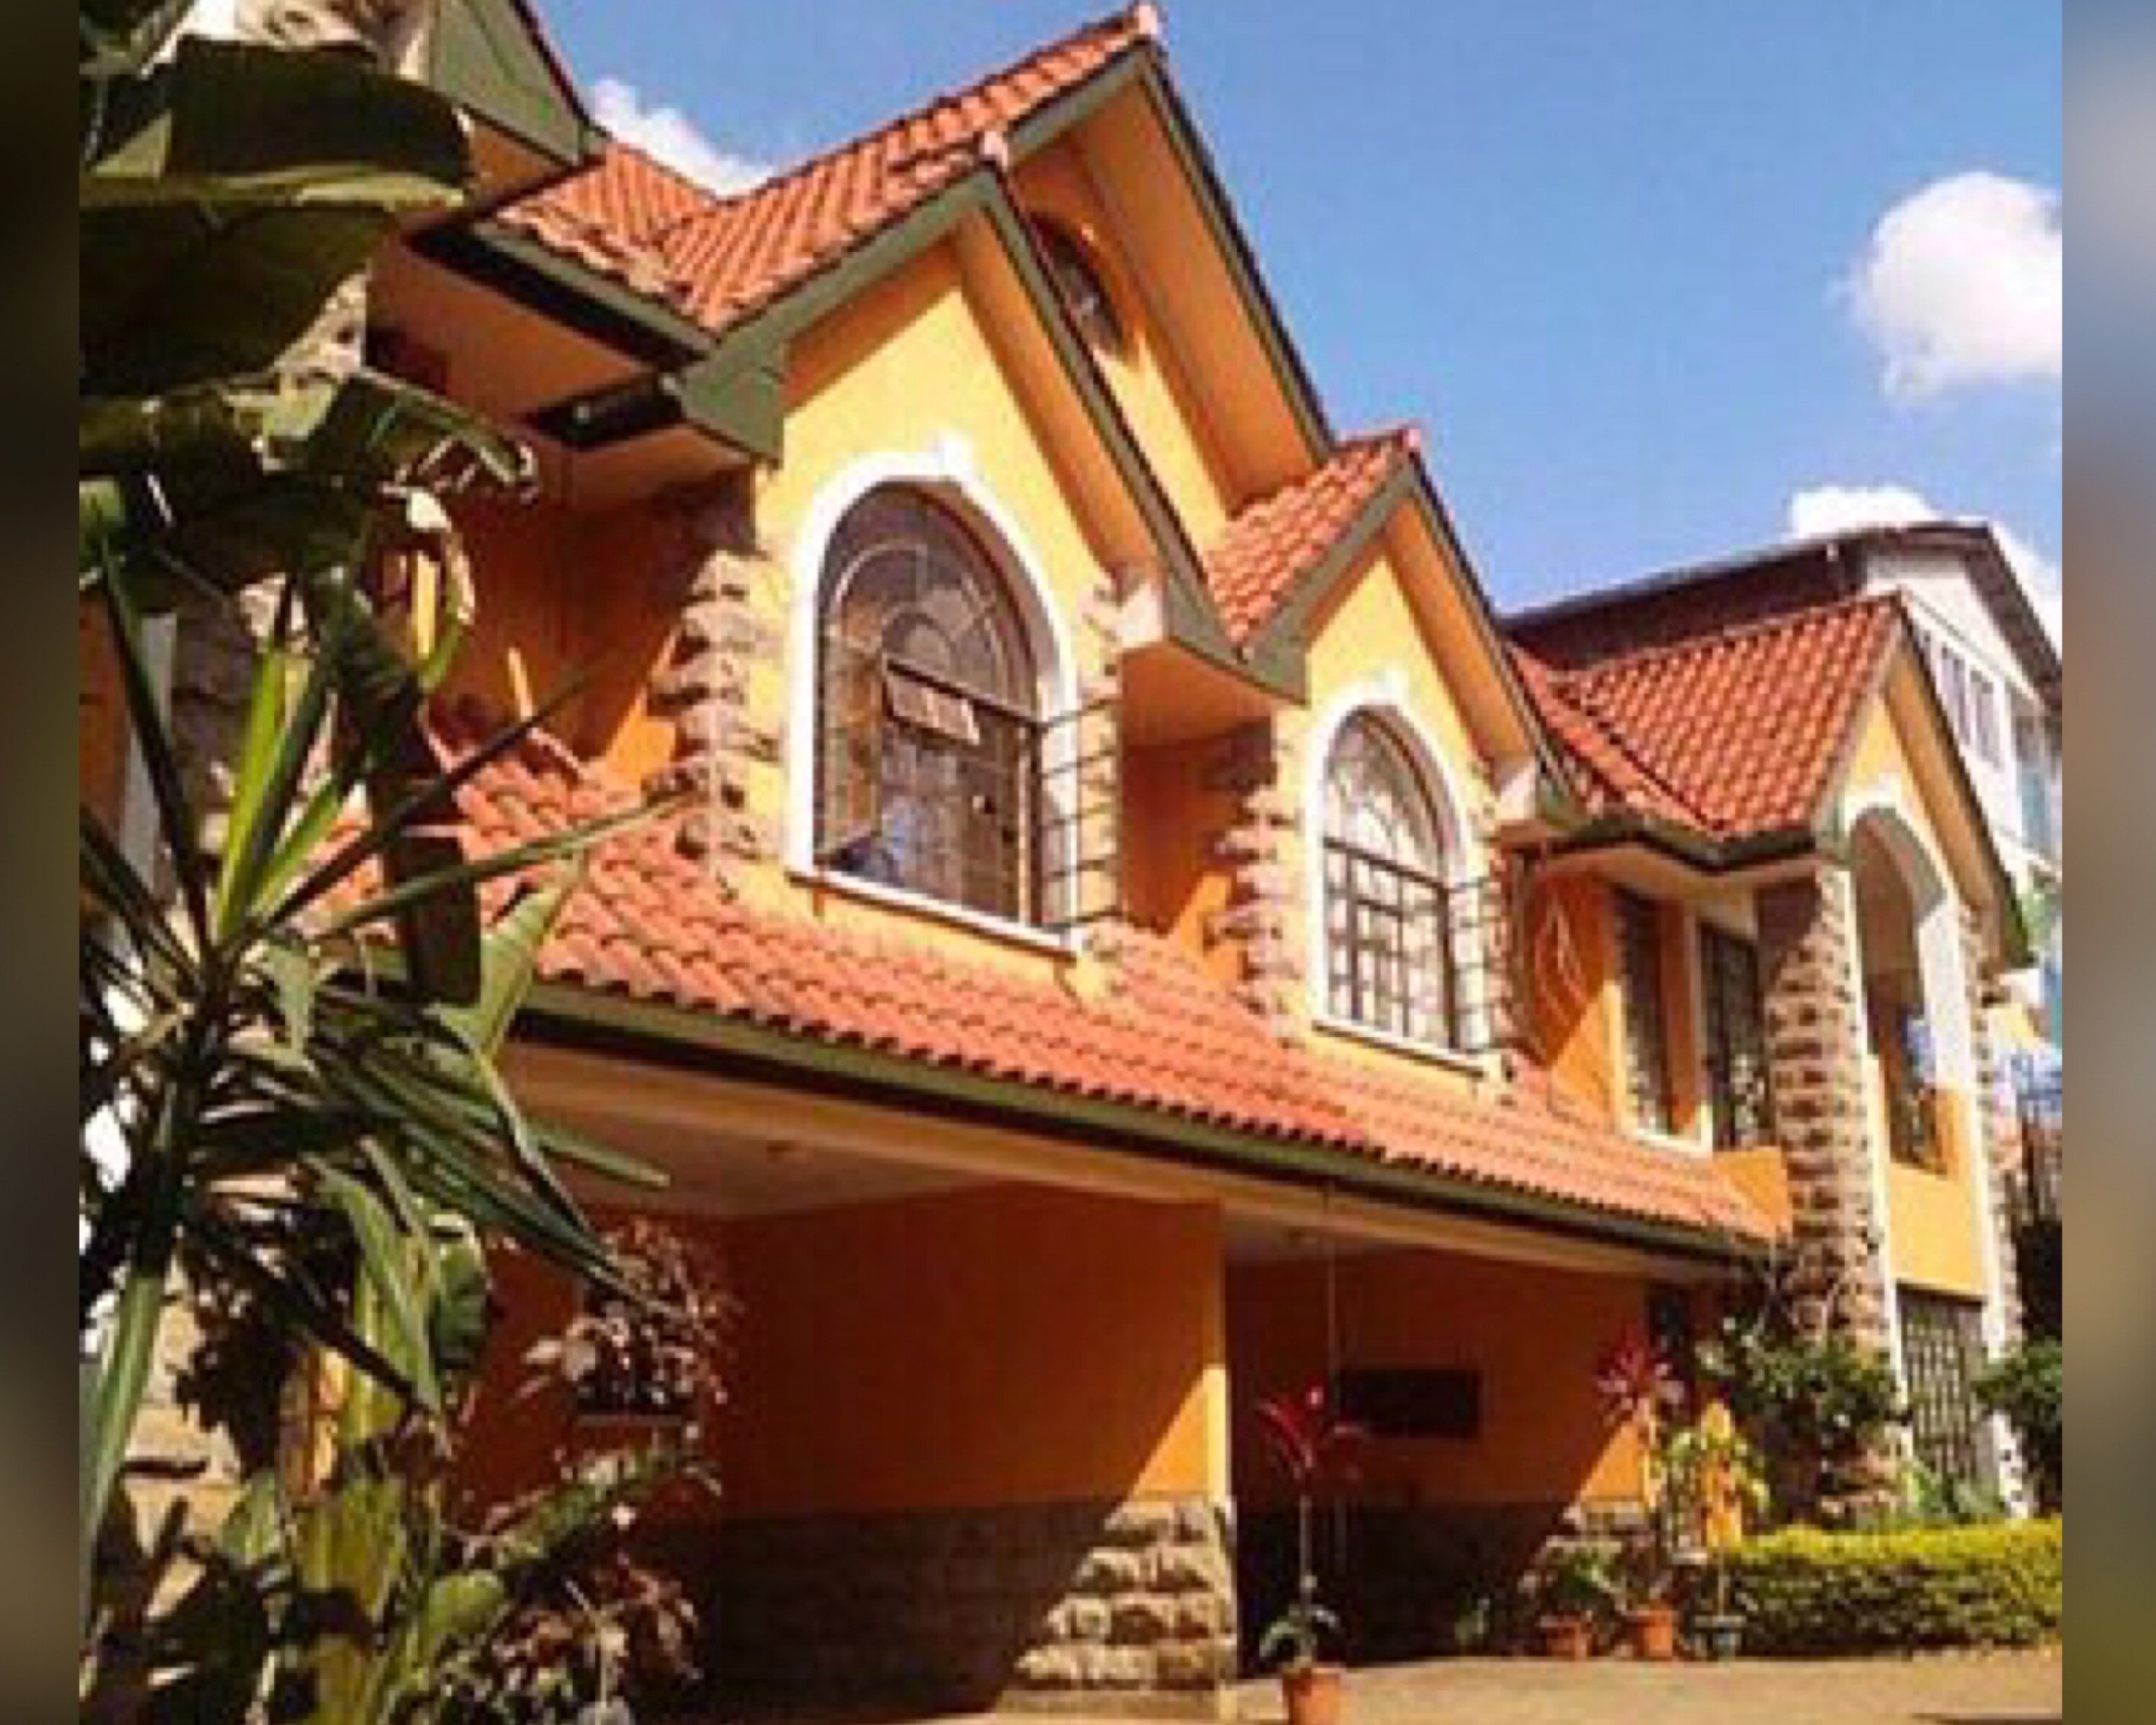 The mansion Dennis oliech bought hi mother